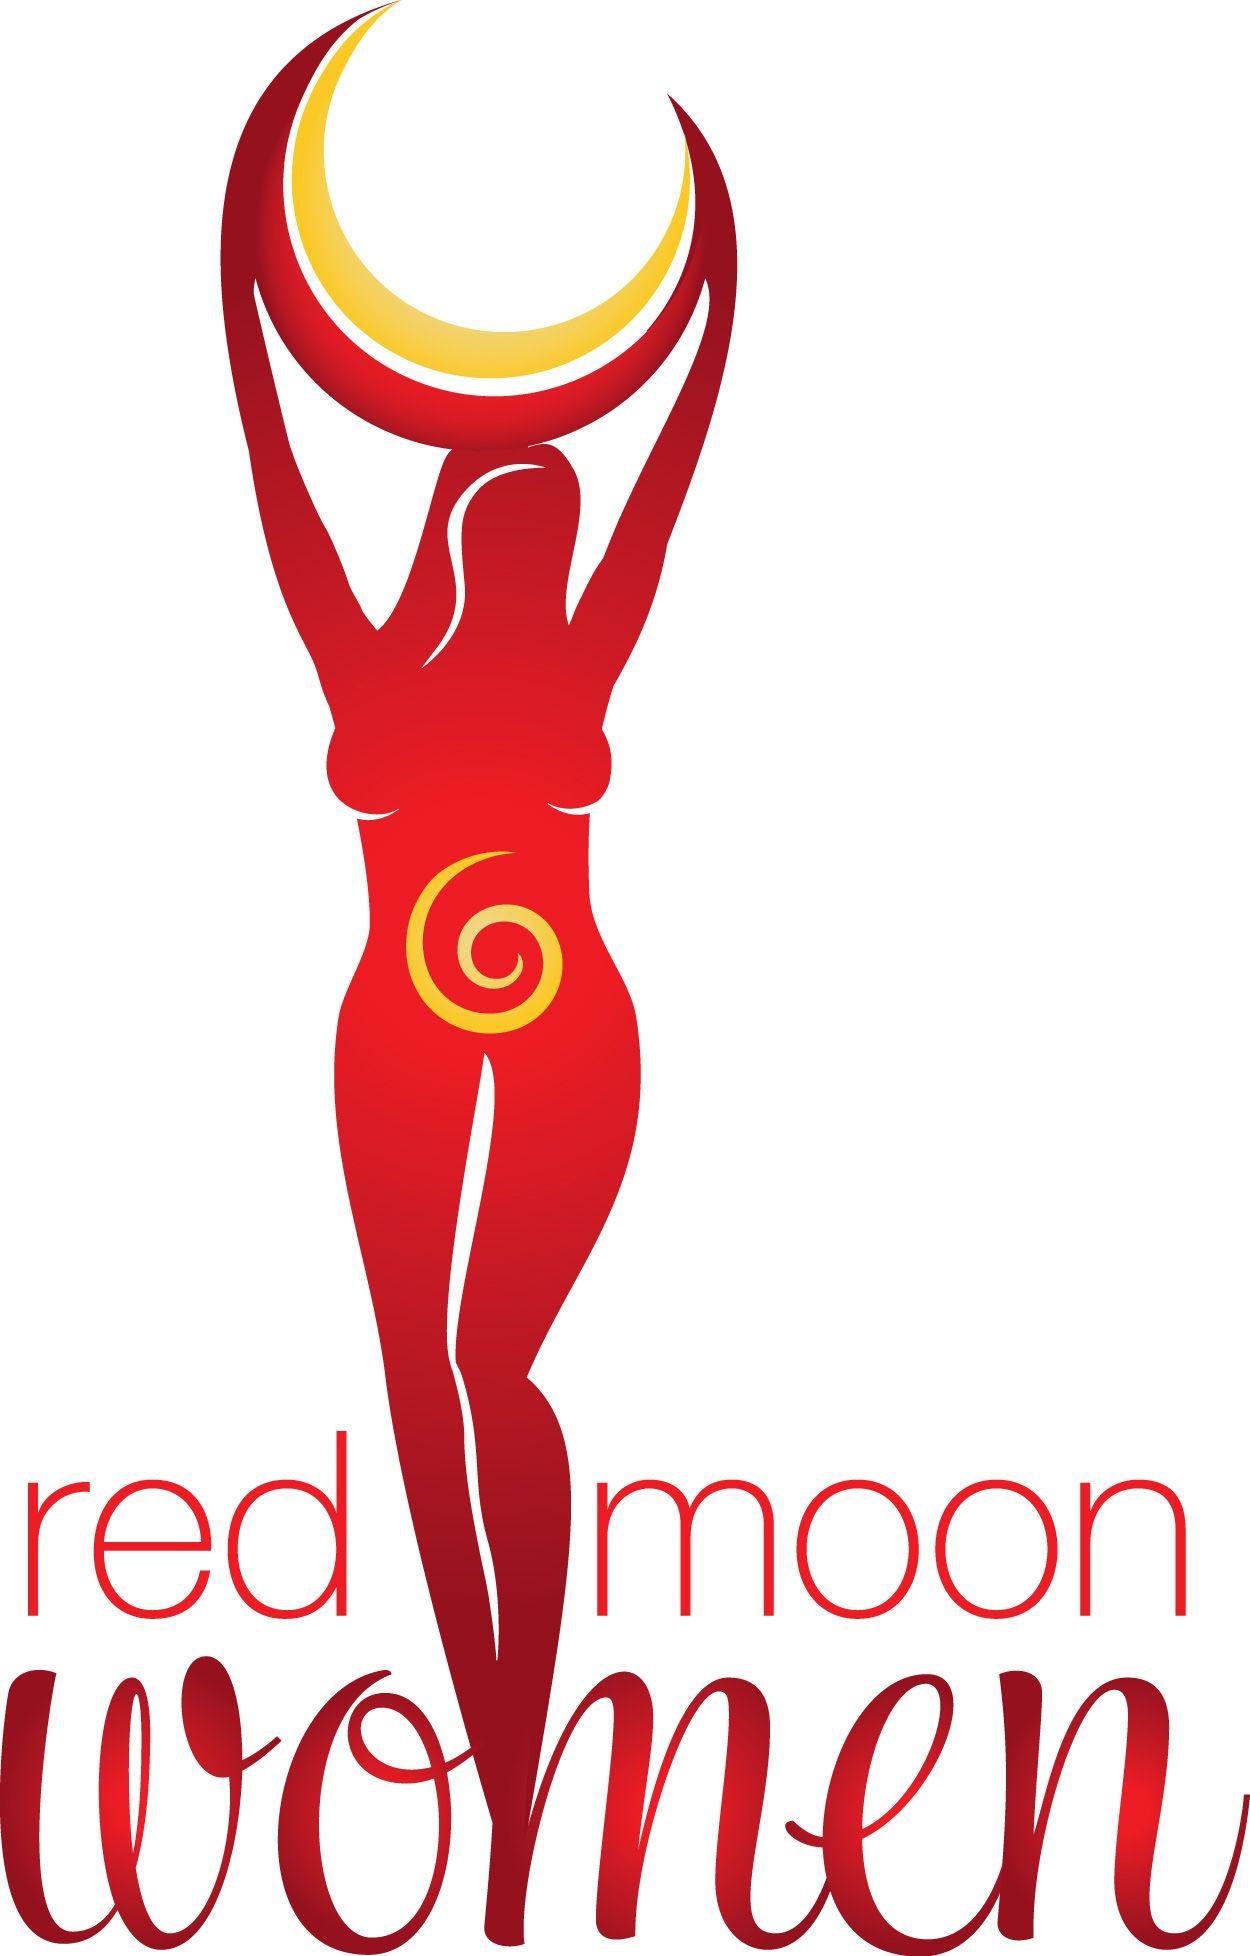 Red Woman Logo - Red Moon Women. Honouring the Wisdom Within